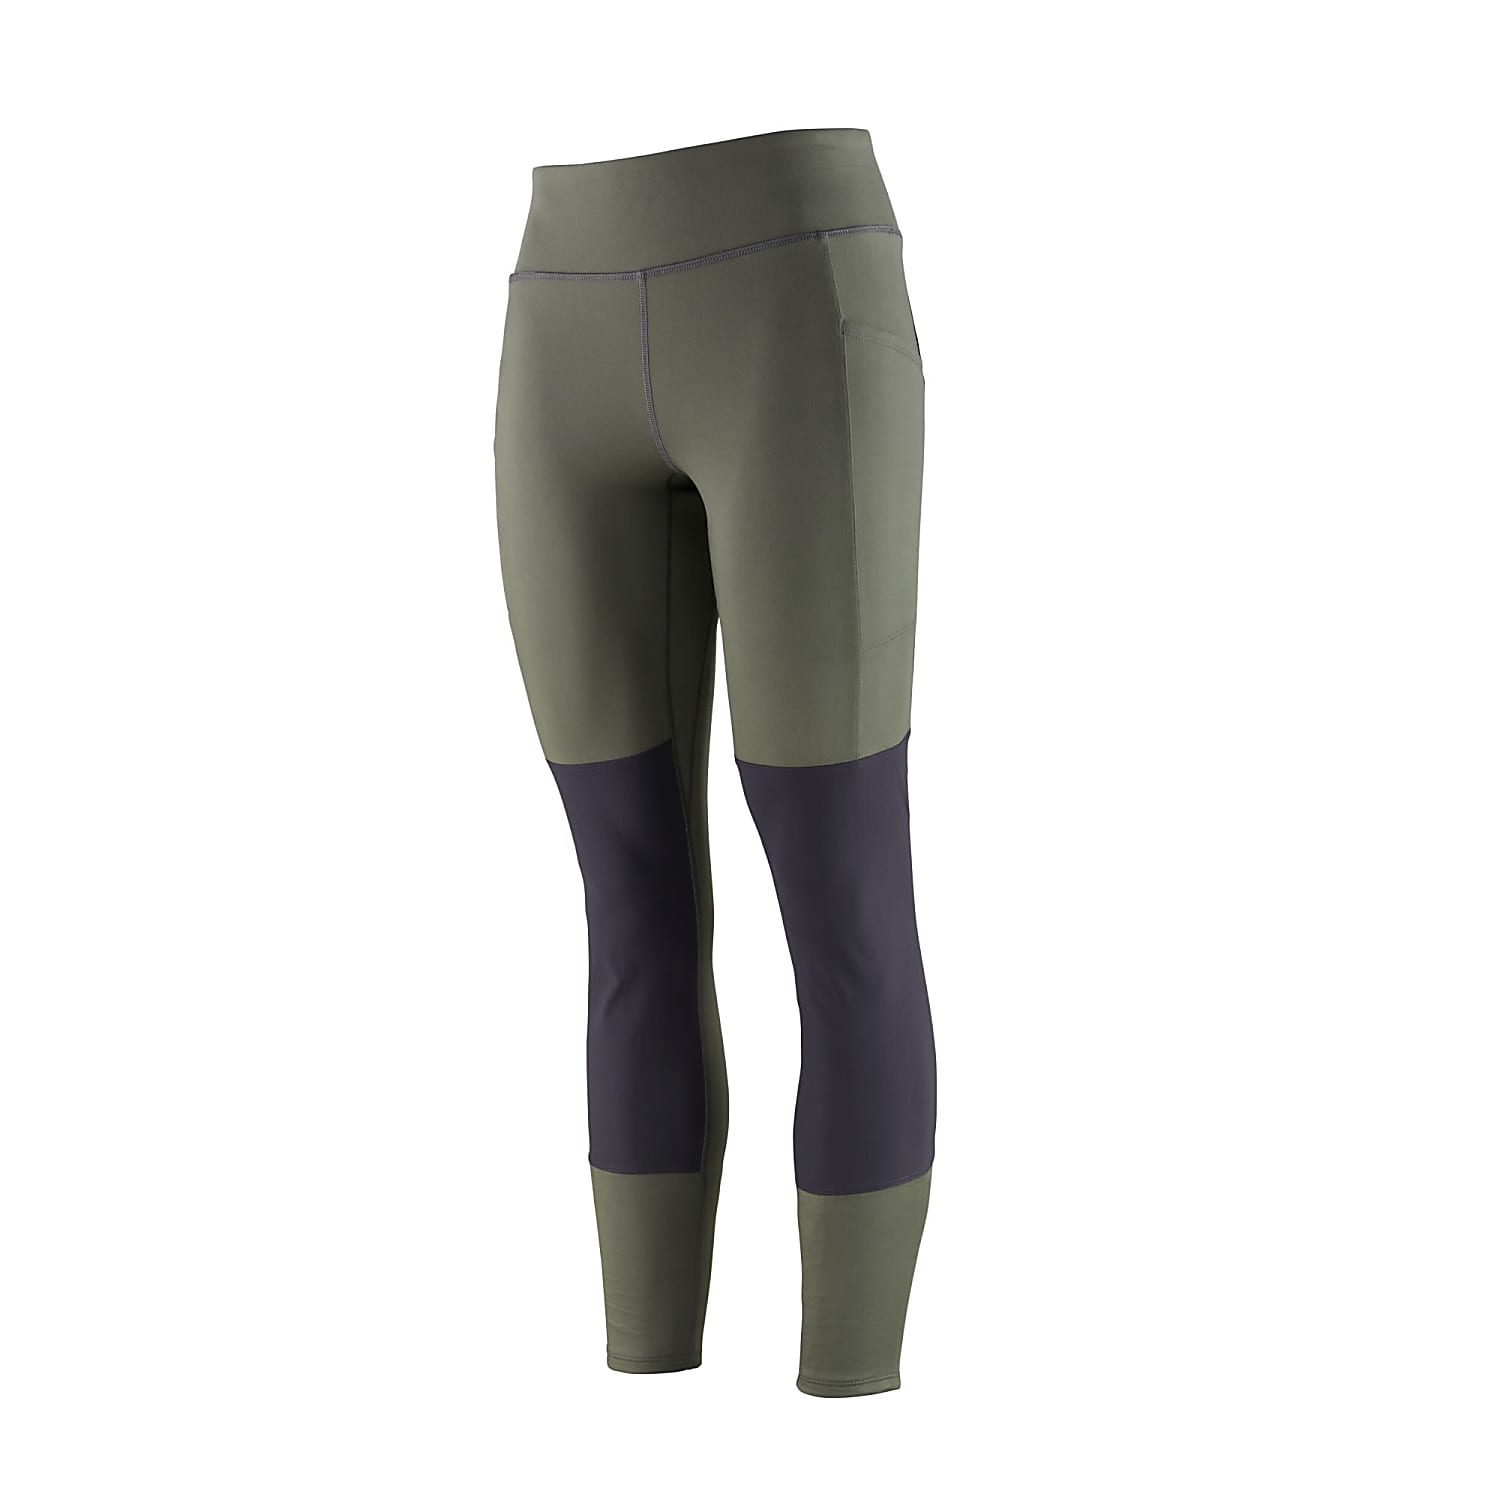 Patagonia Women's Pack Out Tights - Hemlock Green